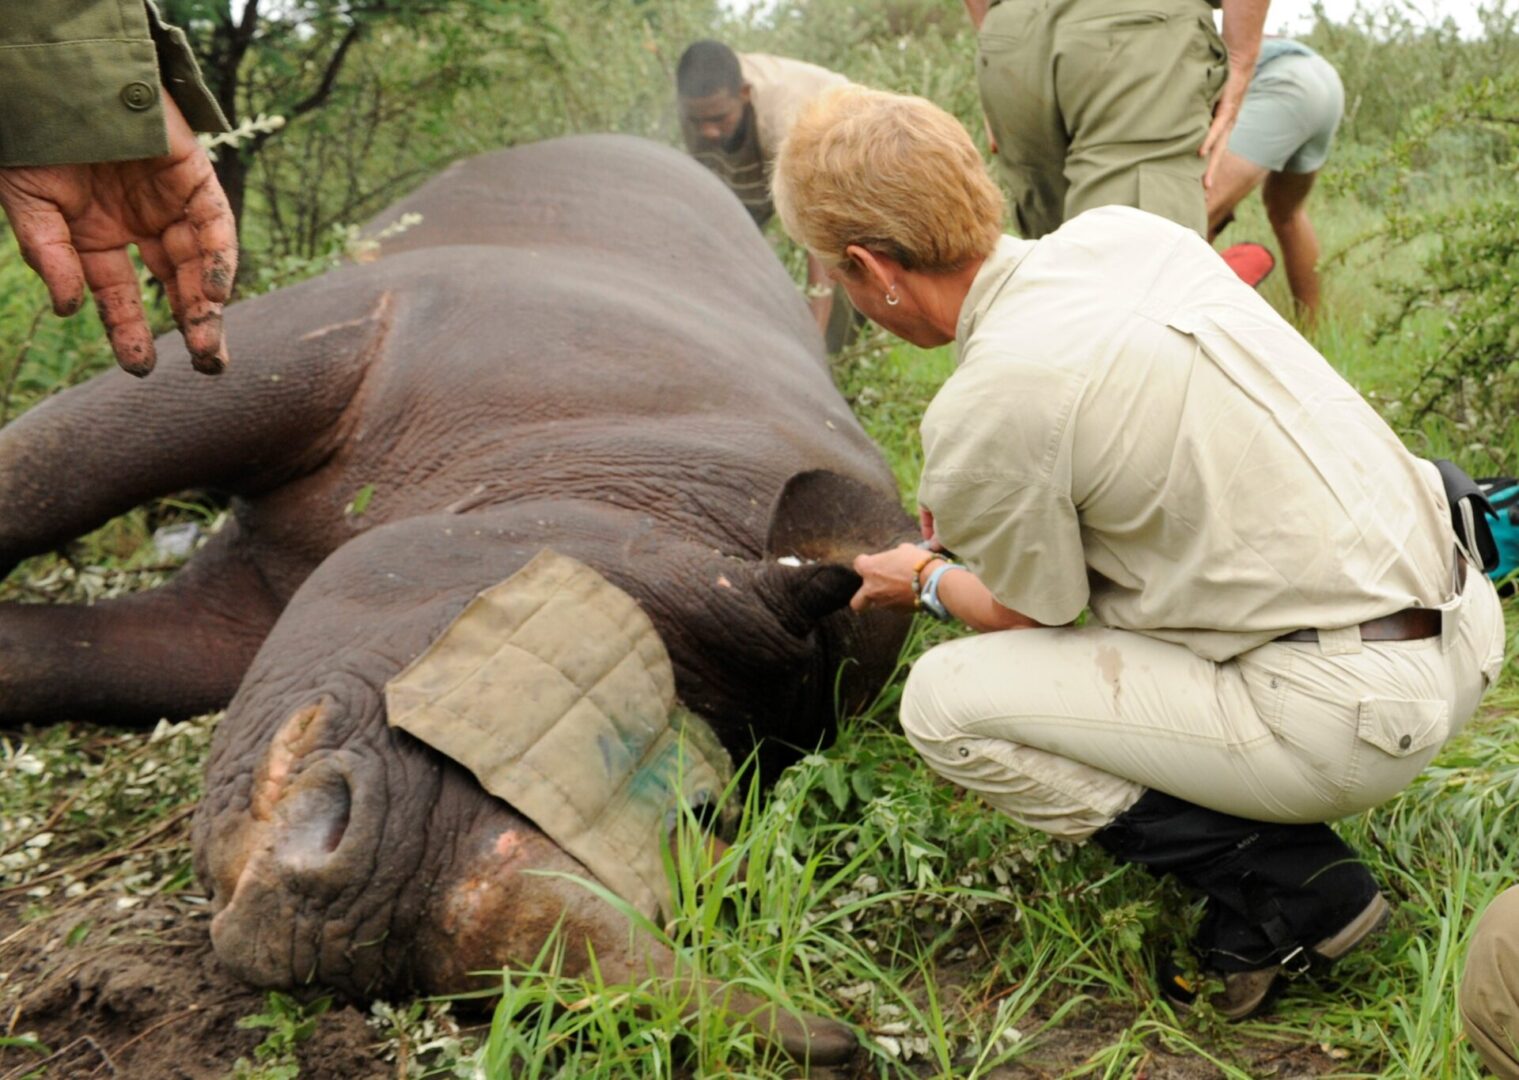 Dr. Michele Miller performs field tests on a safely anesthetized rhino